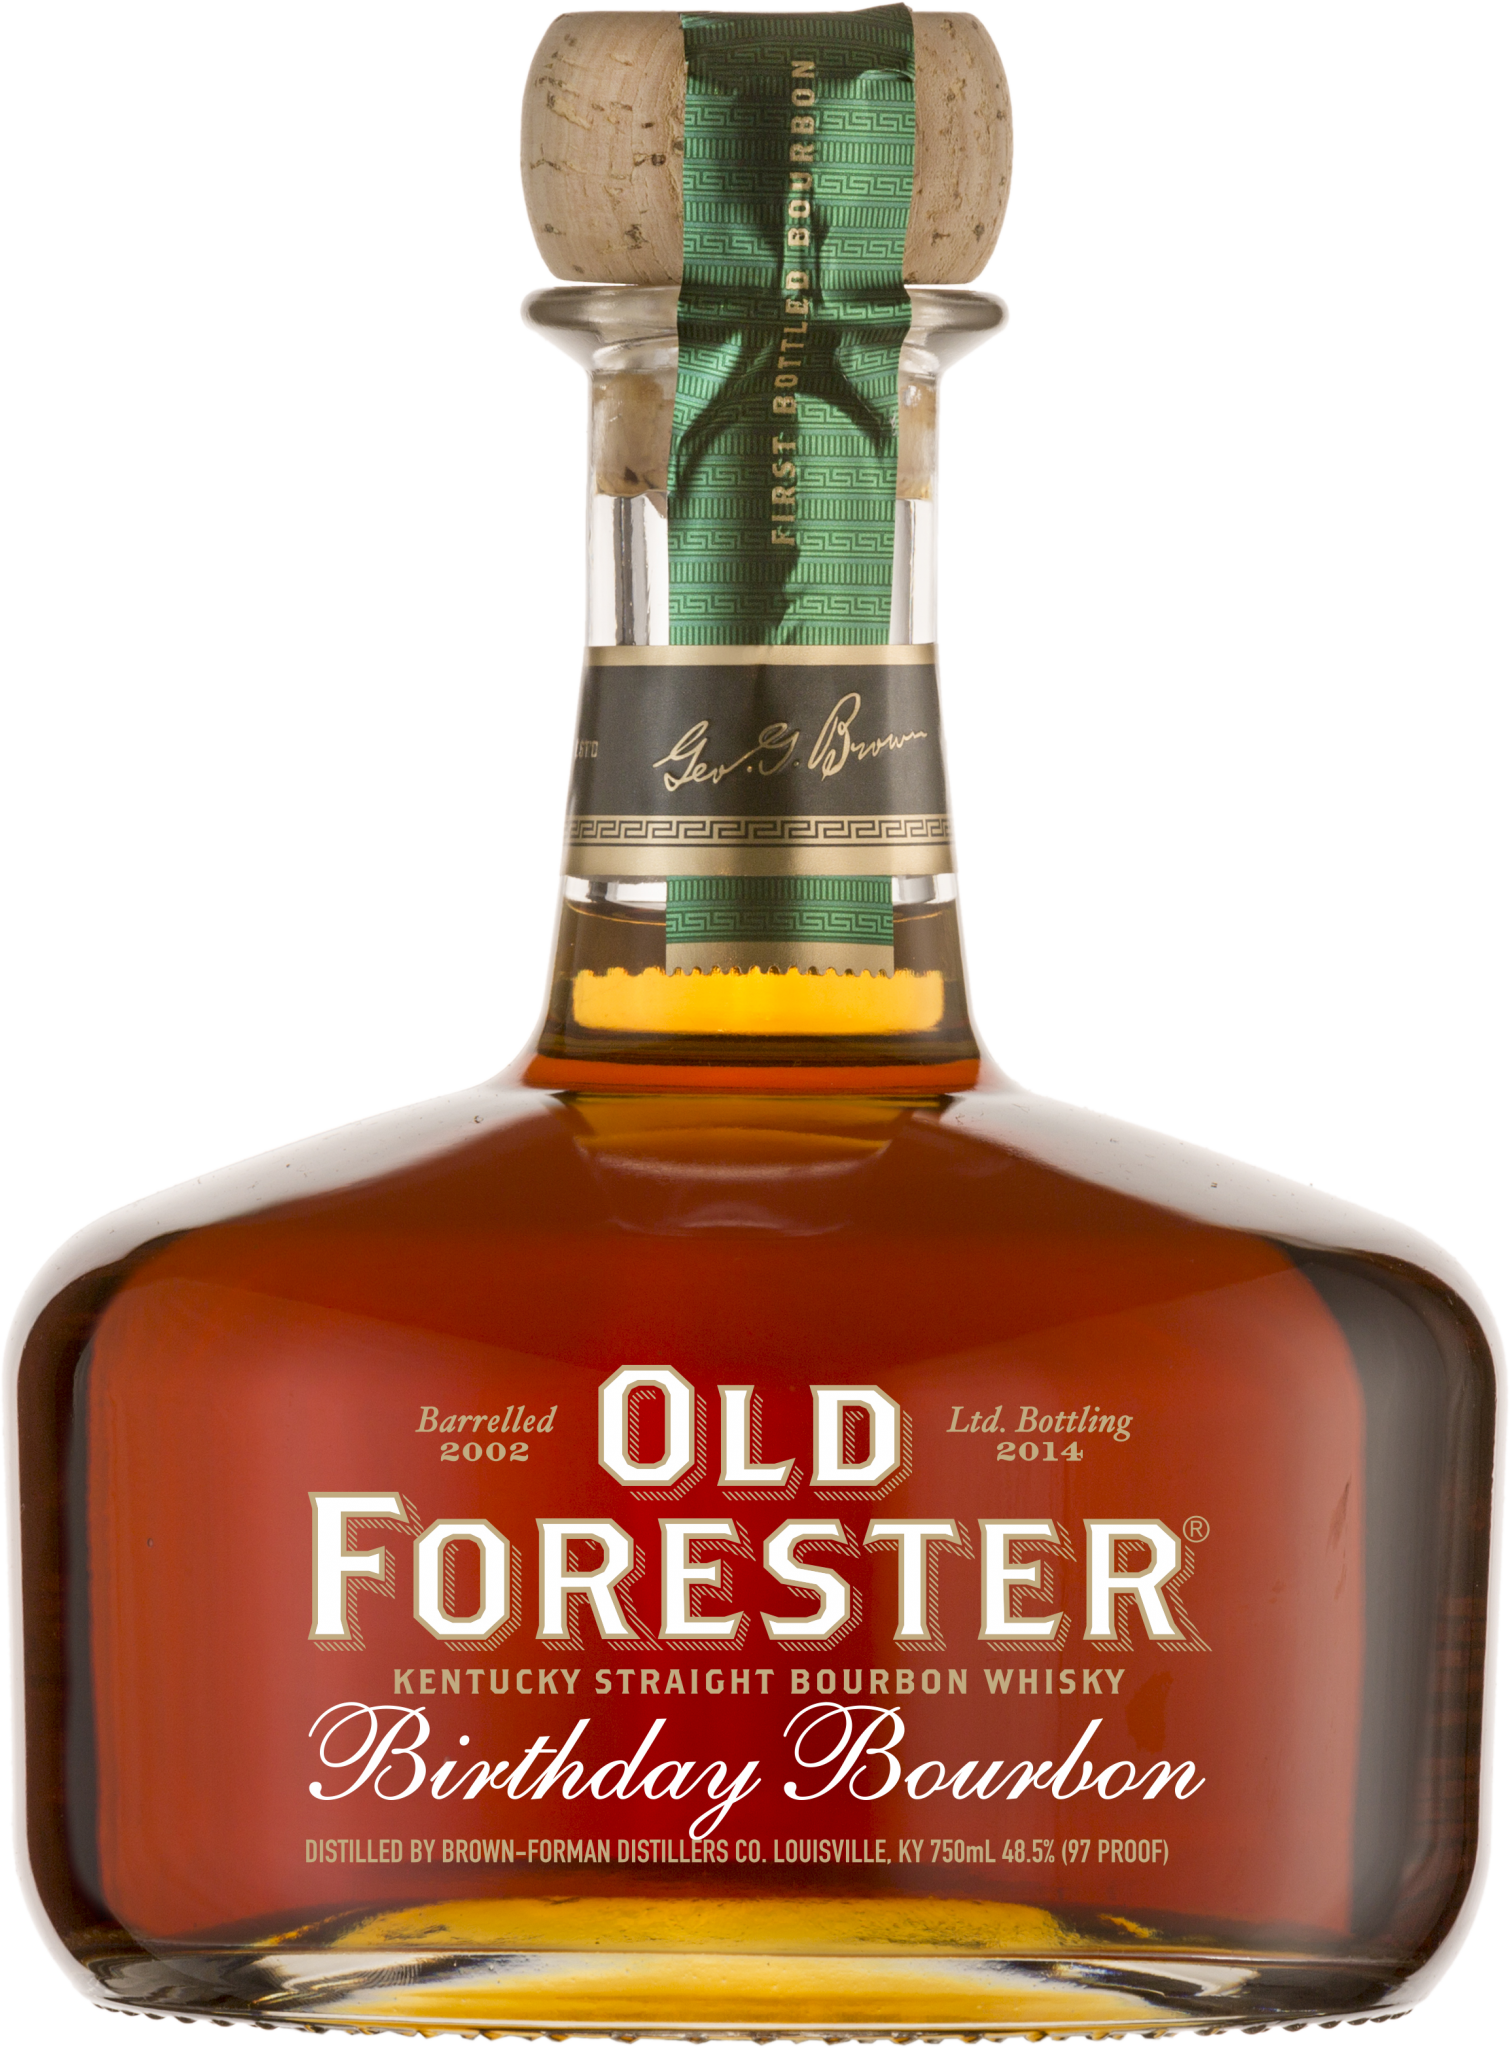 A bottle of Old Forester 2014 Birthday Bourbon on a black background.